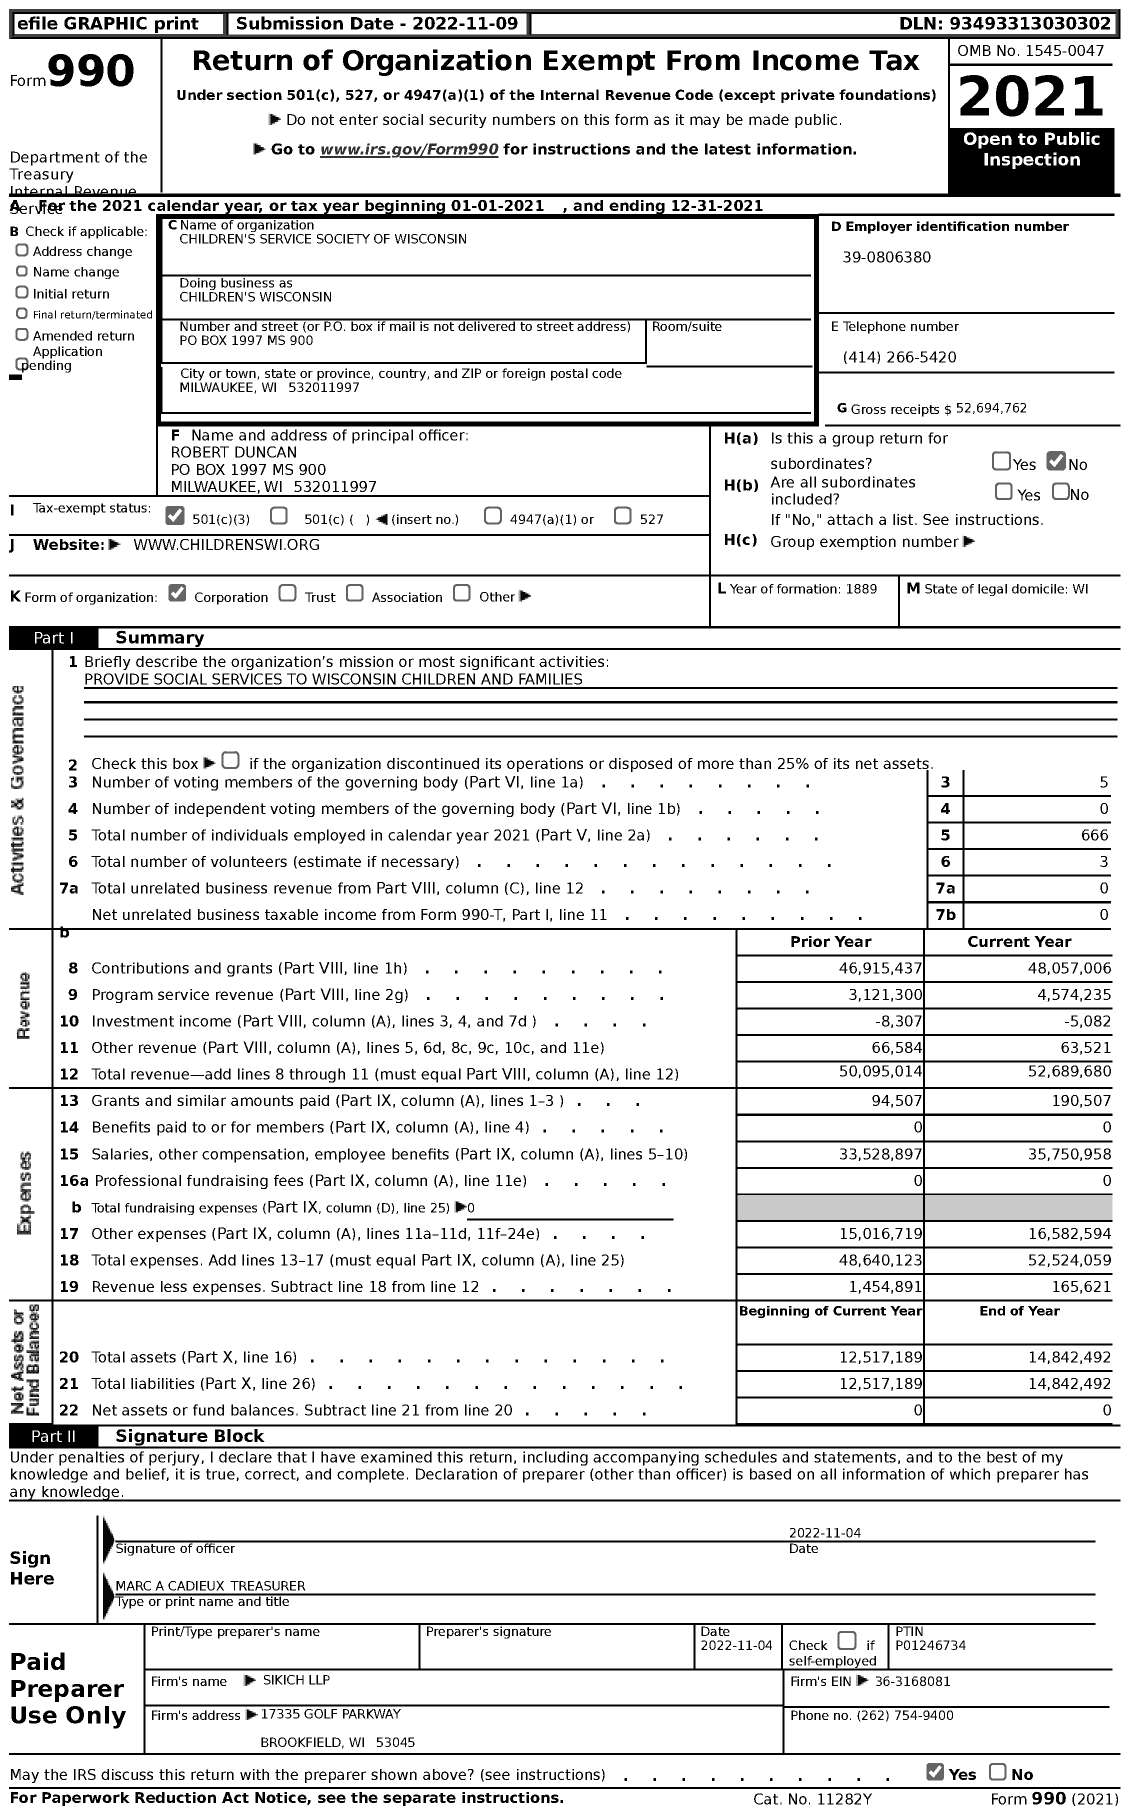 Image of first page of 2021 Form 990 for Children's Wisconsin (CHW)